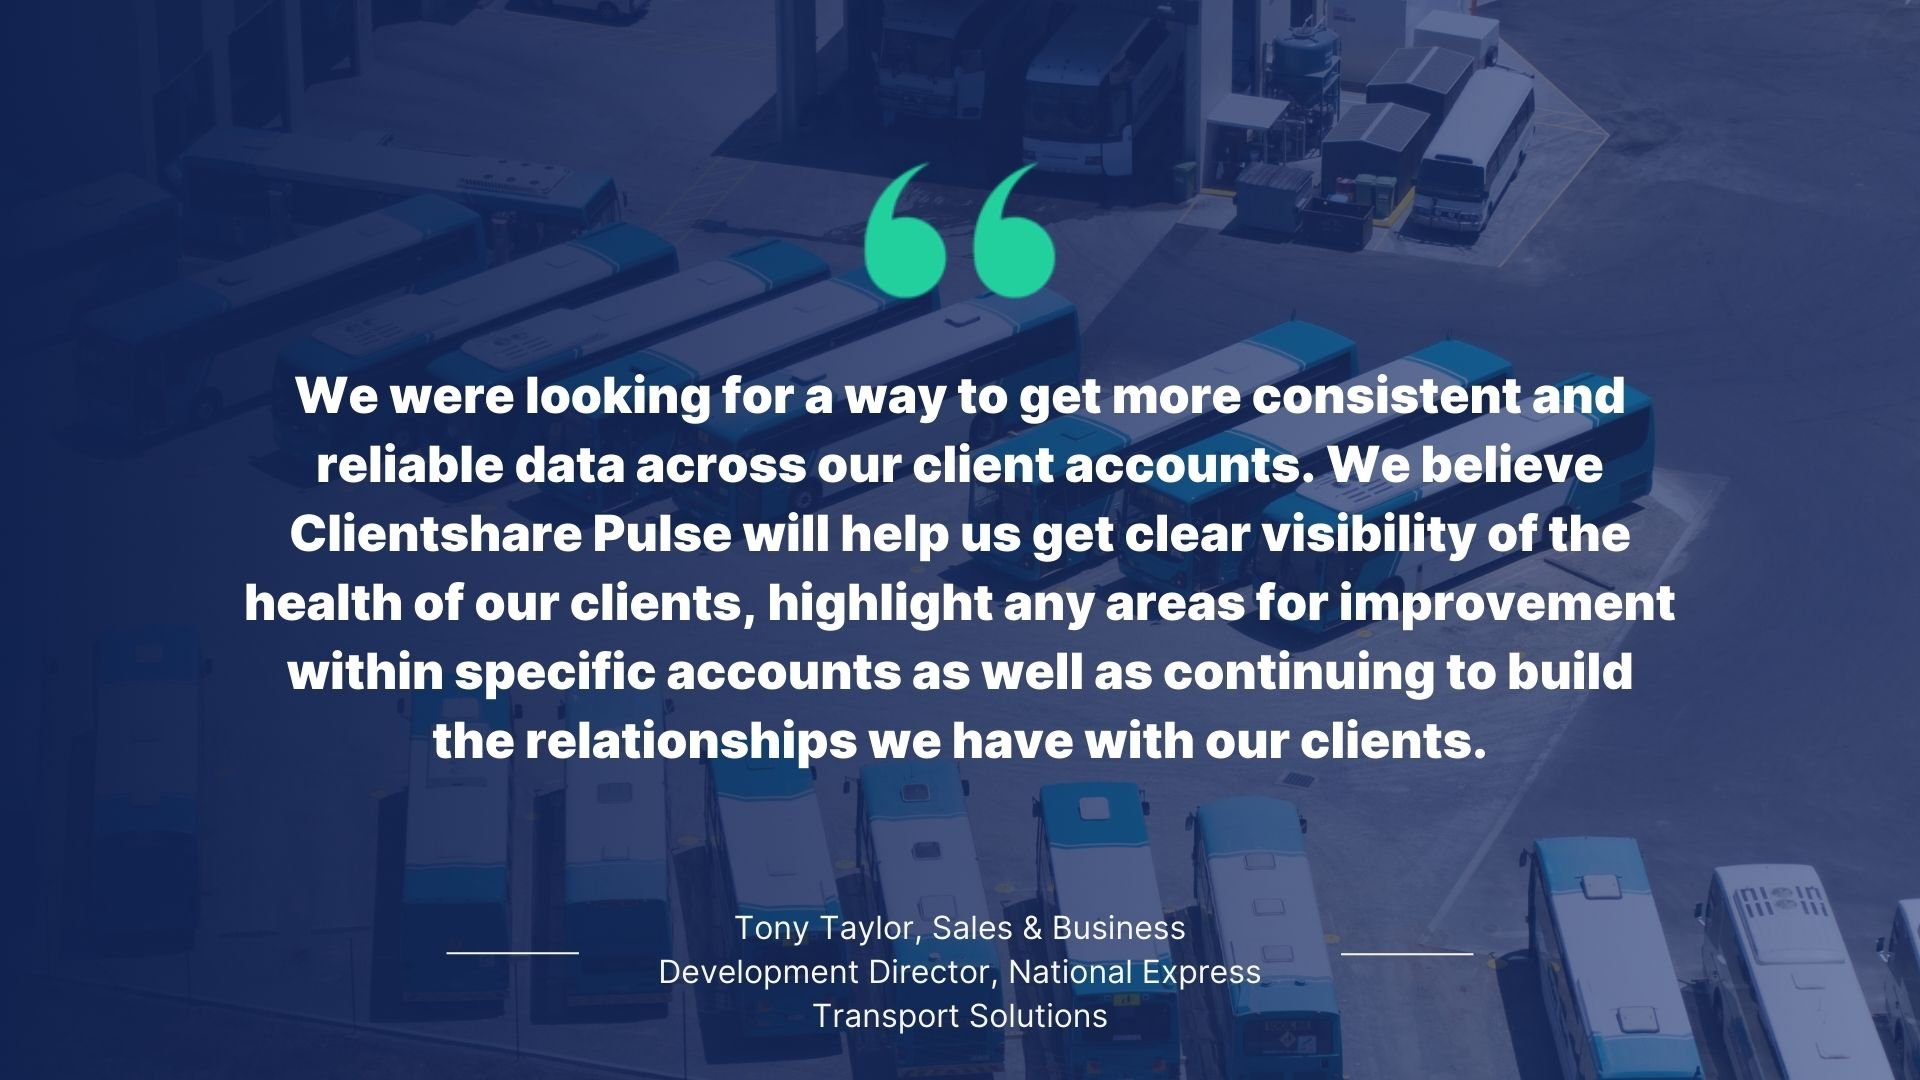 Quote by Tony Taylor, Sales & Business Development Director, National Express Transport Solutions: We were looking for a way to get more consistent and reliable data across our client accounts. We blieve Clientshare Pulse will help us get clear visibility of the health of our clients, highlight any areas for inprovement within specific accounts asa well as continuing to build the relationships we have with our clients.